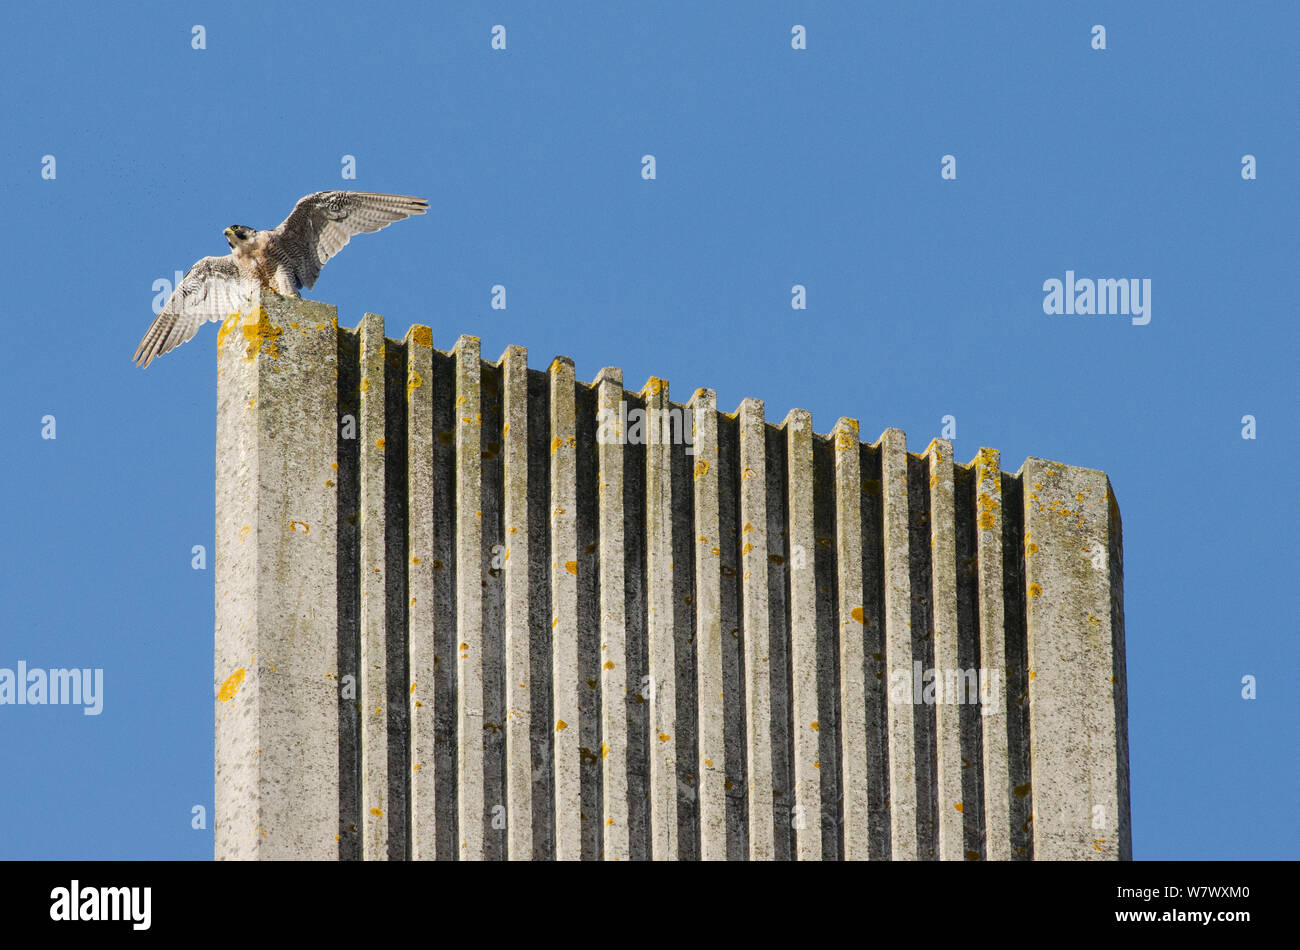 Peregrine falcon (Falco peregrinus) on top of modern cathedral spire with wings spread. Bristol, UK. September. Stock Photo